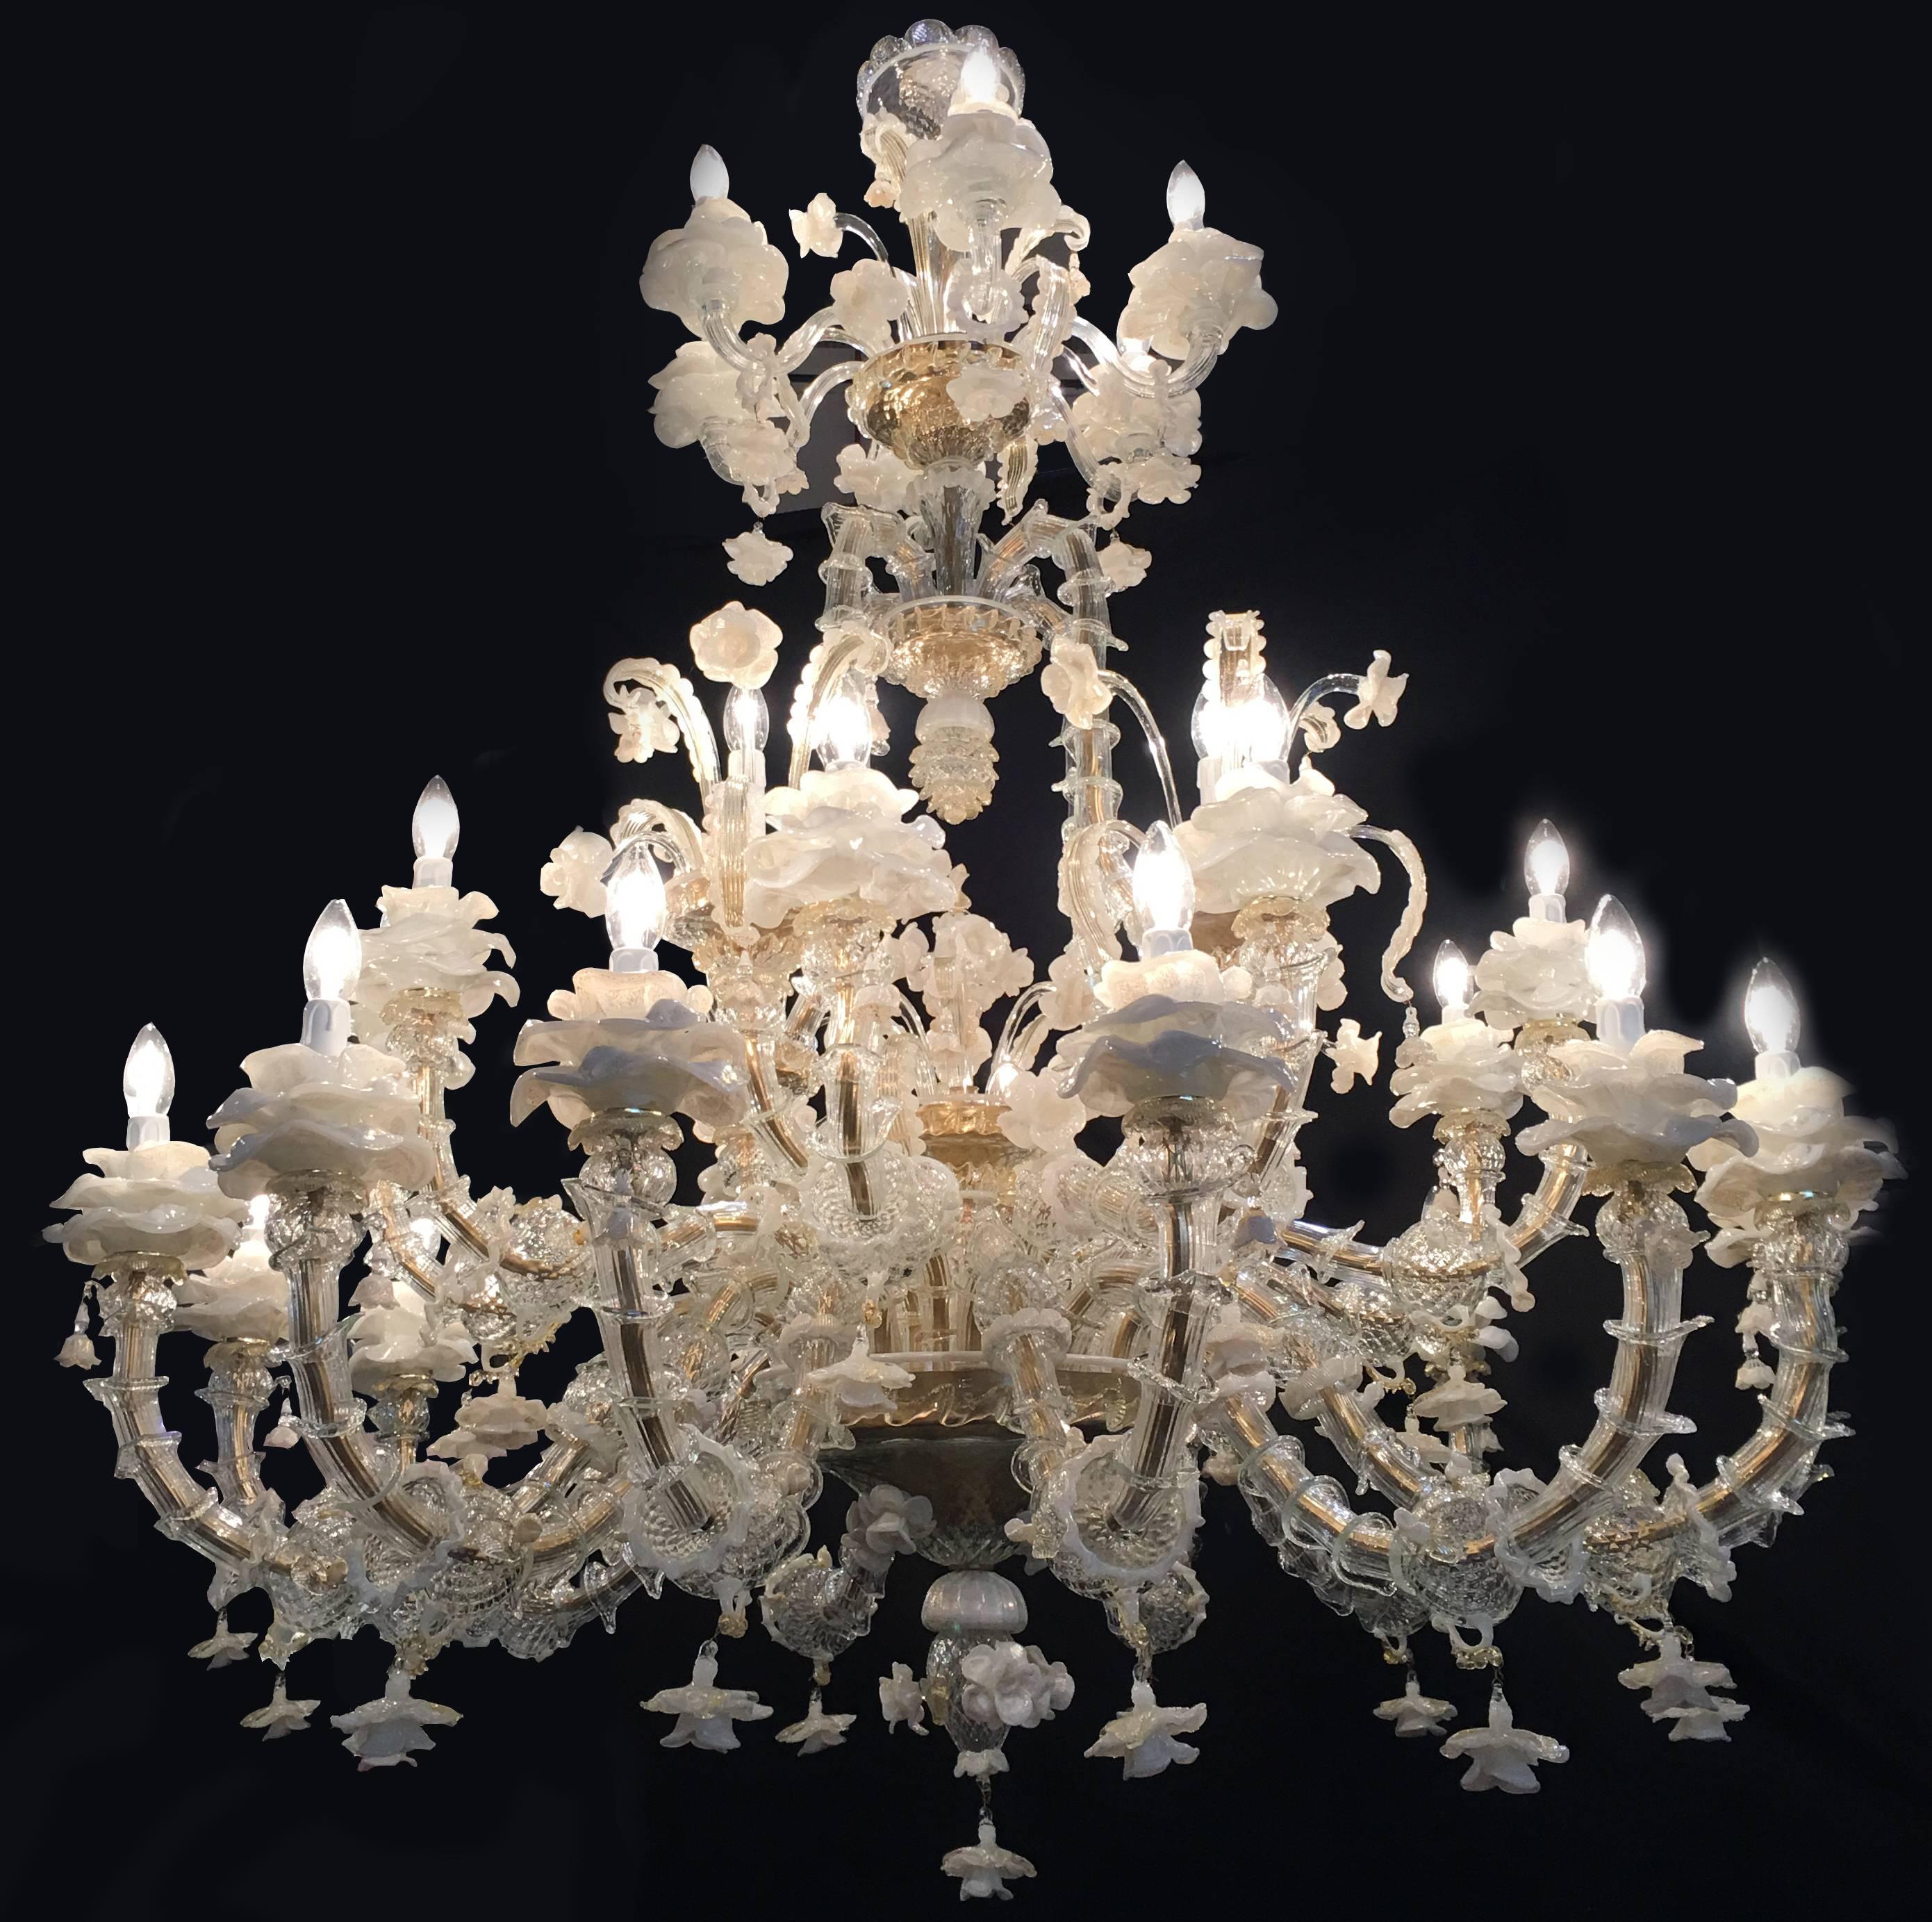 Beautiful pair of Murano chandeliers with 18 arms and a multitude of flowers in glass paste and gold inclusion.